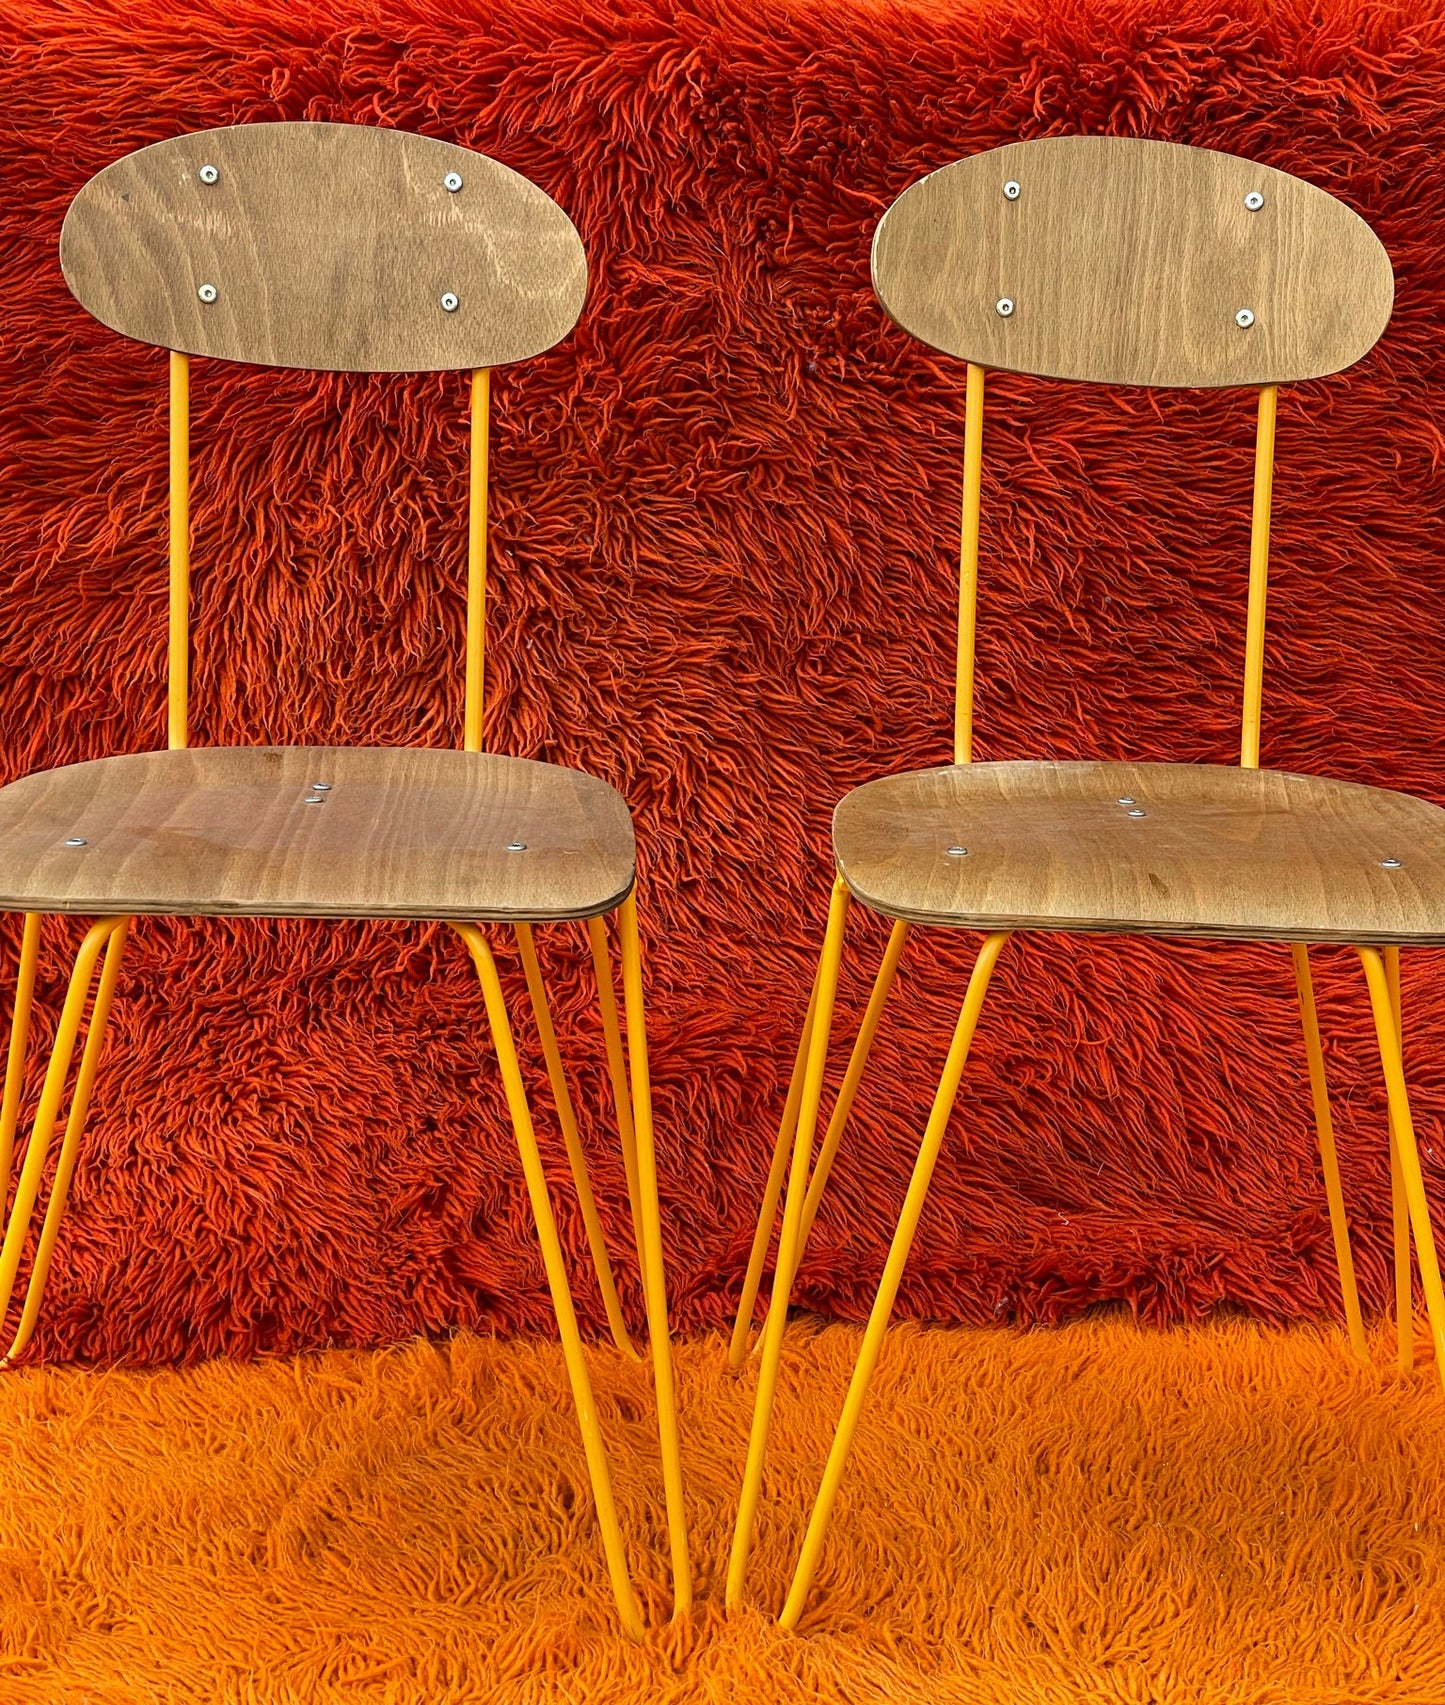 Pair of Wooden Chairs with Orange Chrome Legs